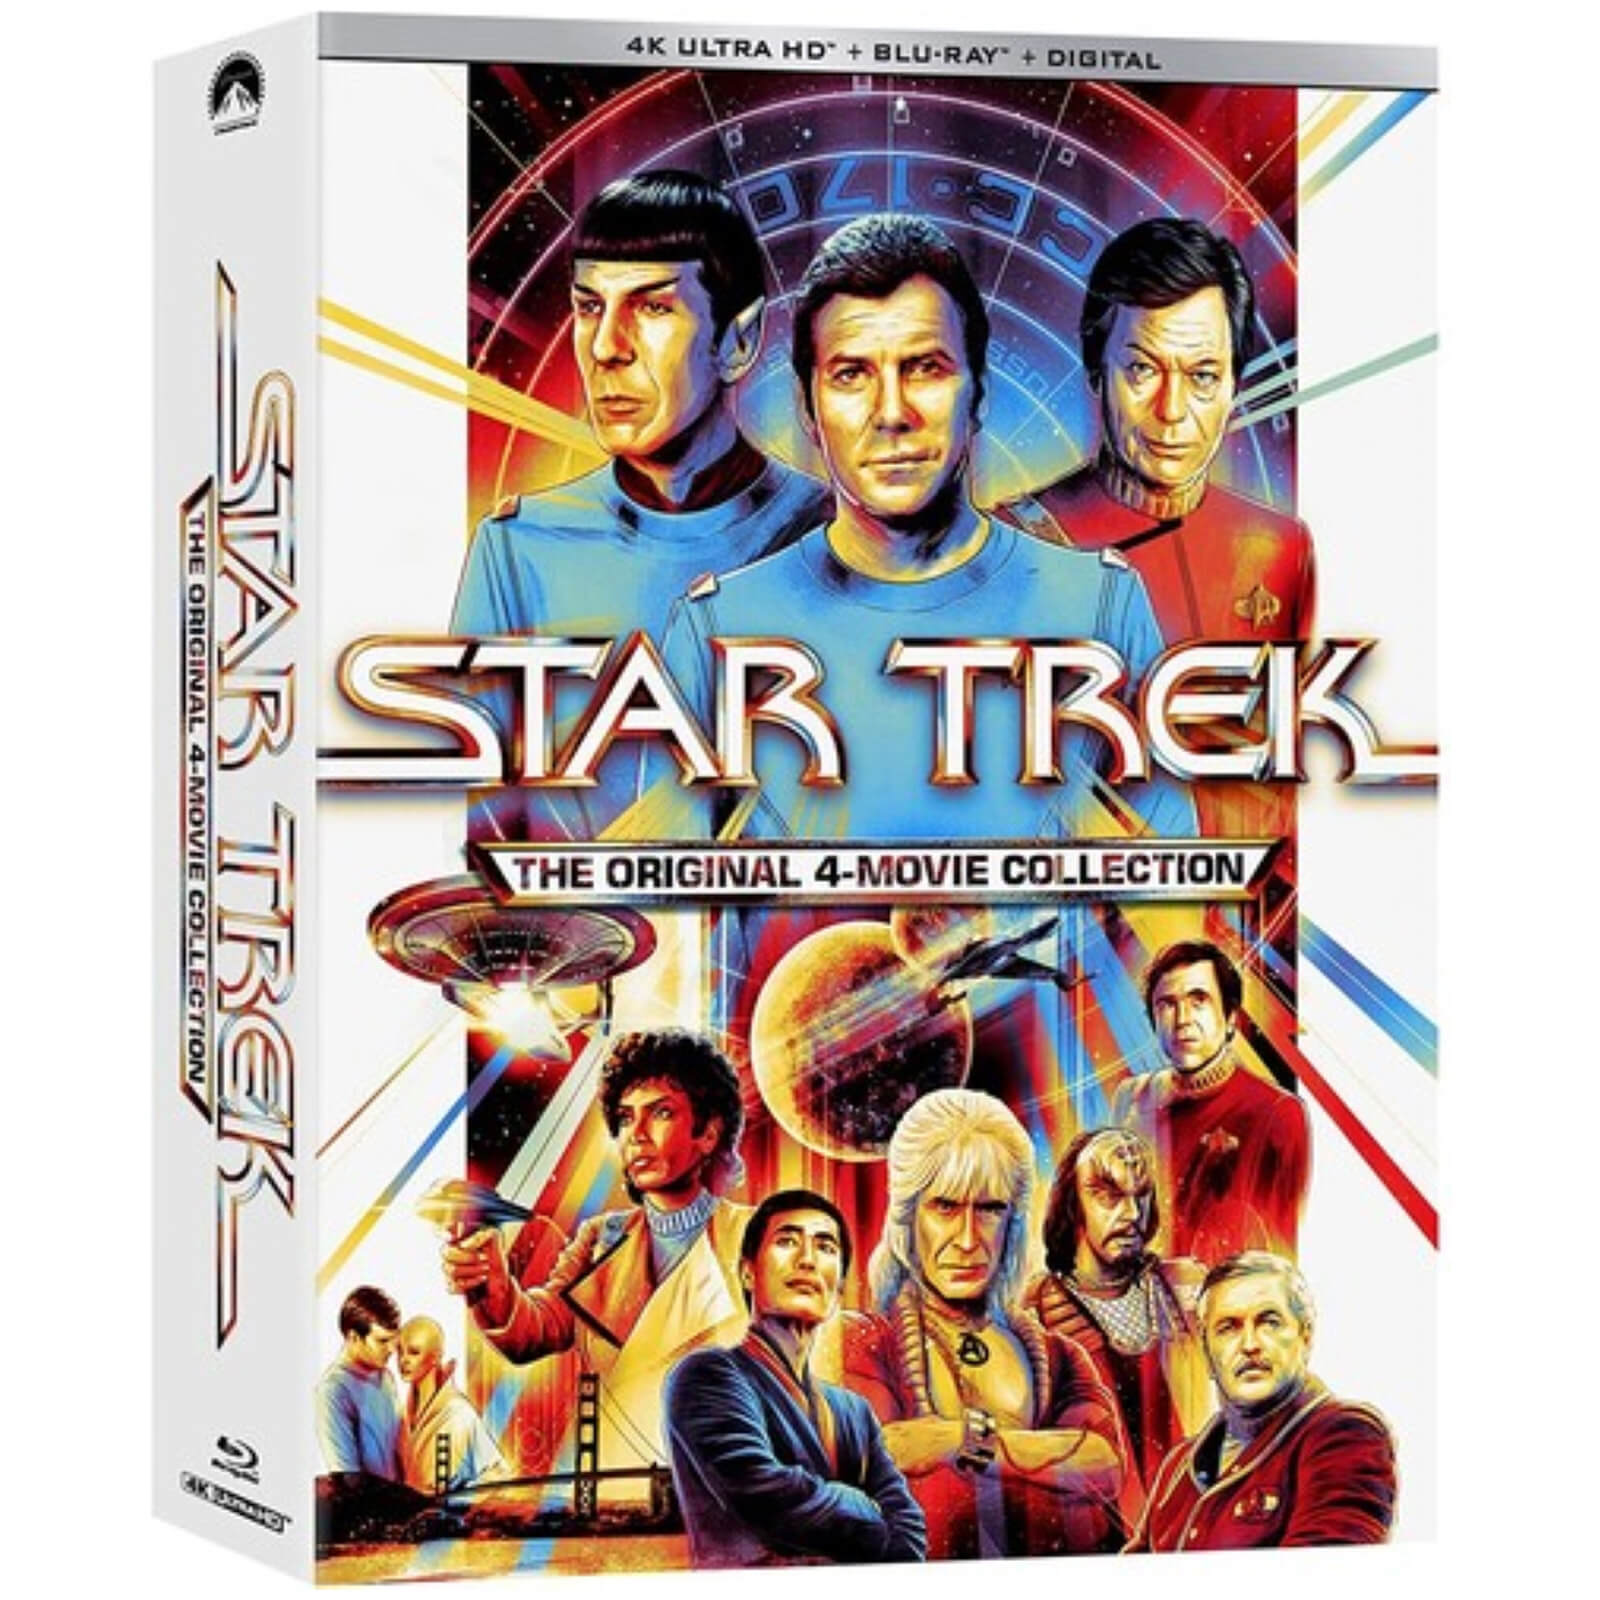 Star Trek: The Original 4-Movie Collection - 4K Ultra HD (Includes Blu-ray) (US Import)